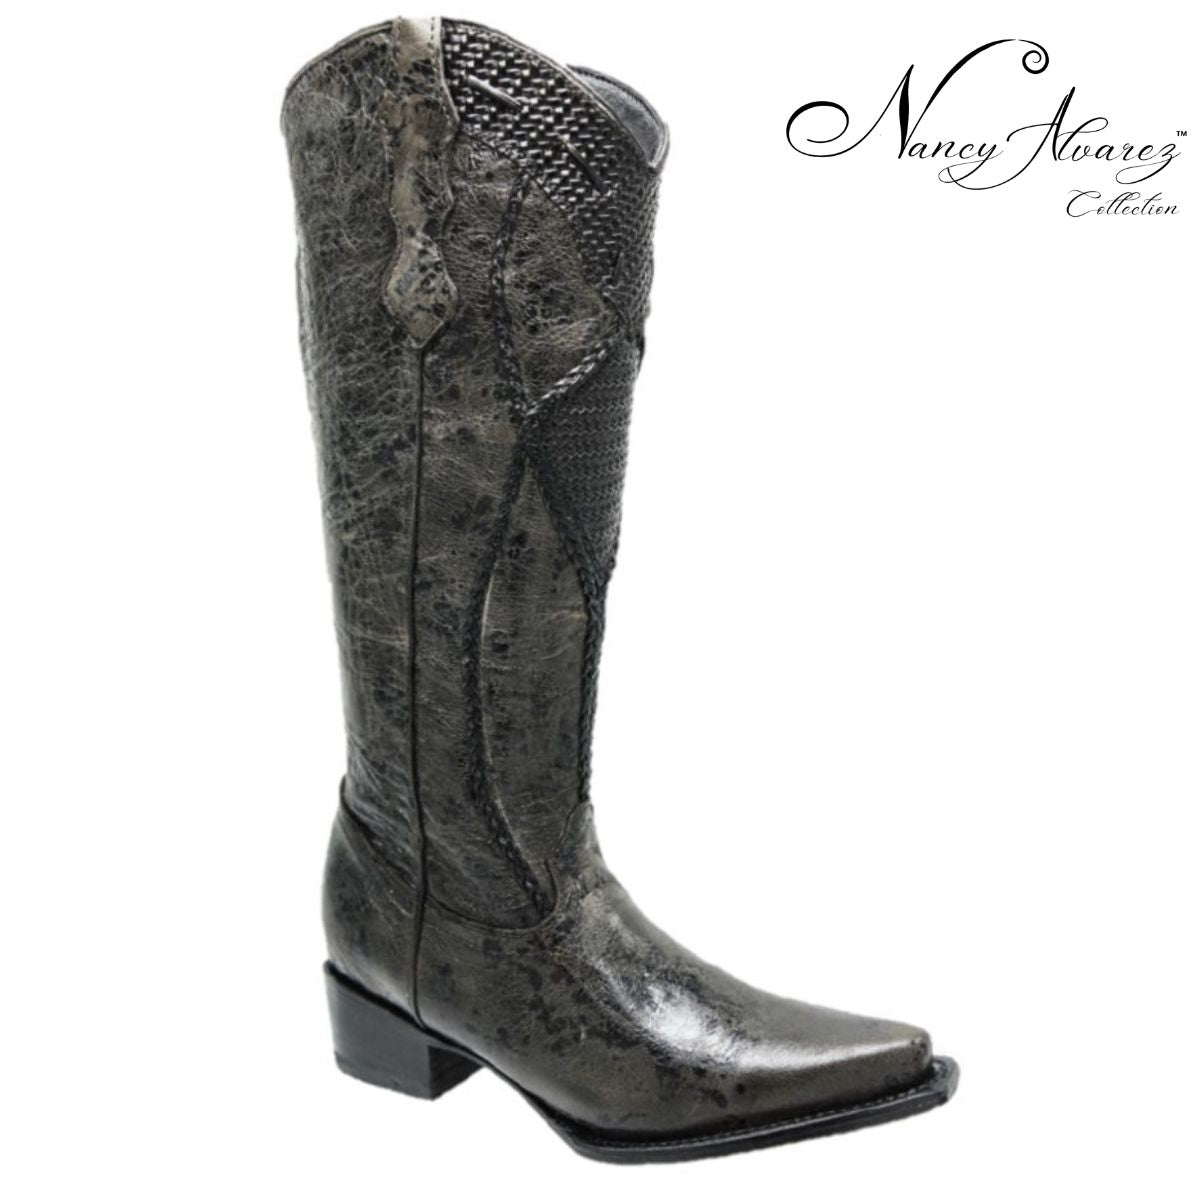 Western Boots - NA-WD0525-525